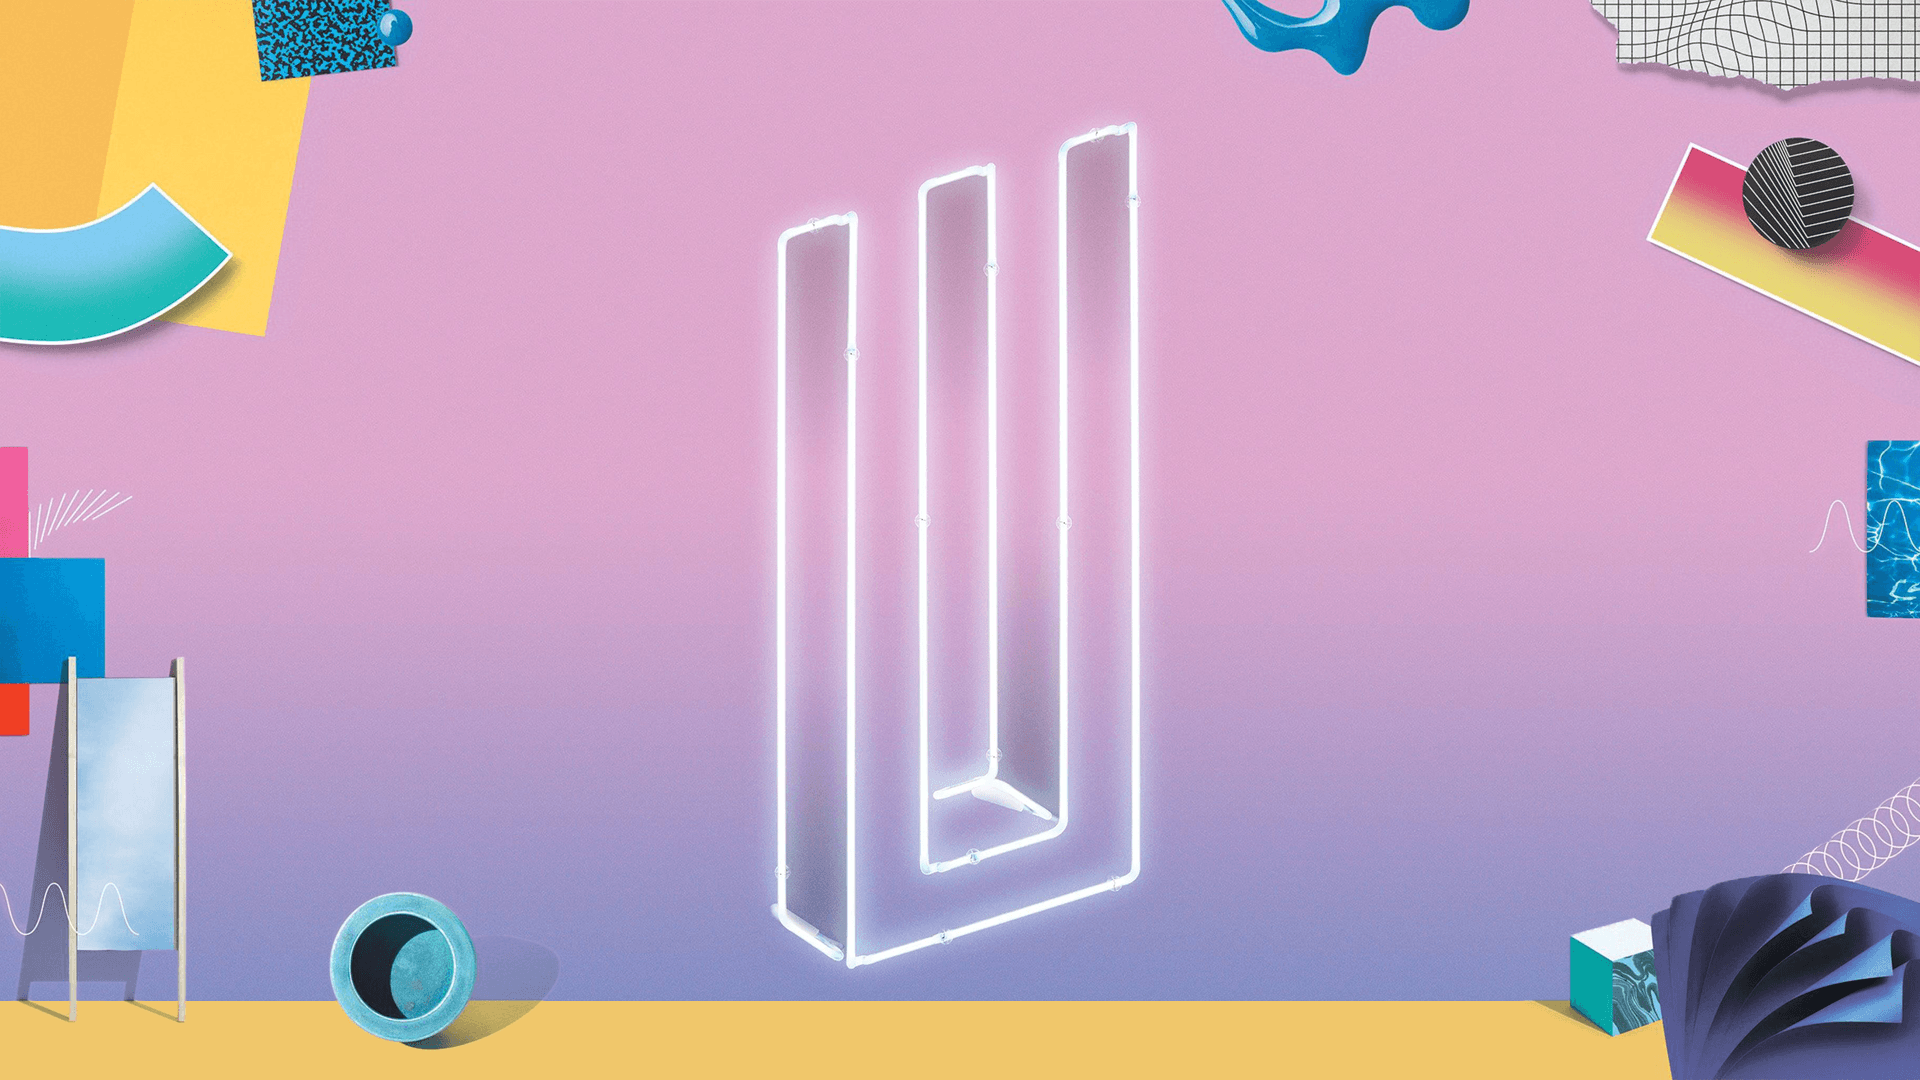 I made an After Laughter wallpaper [1920x1080]